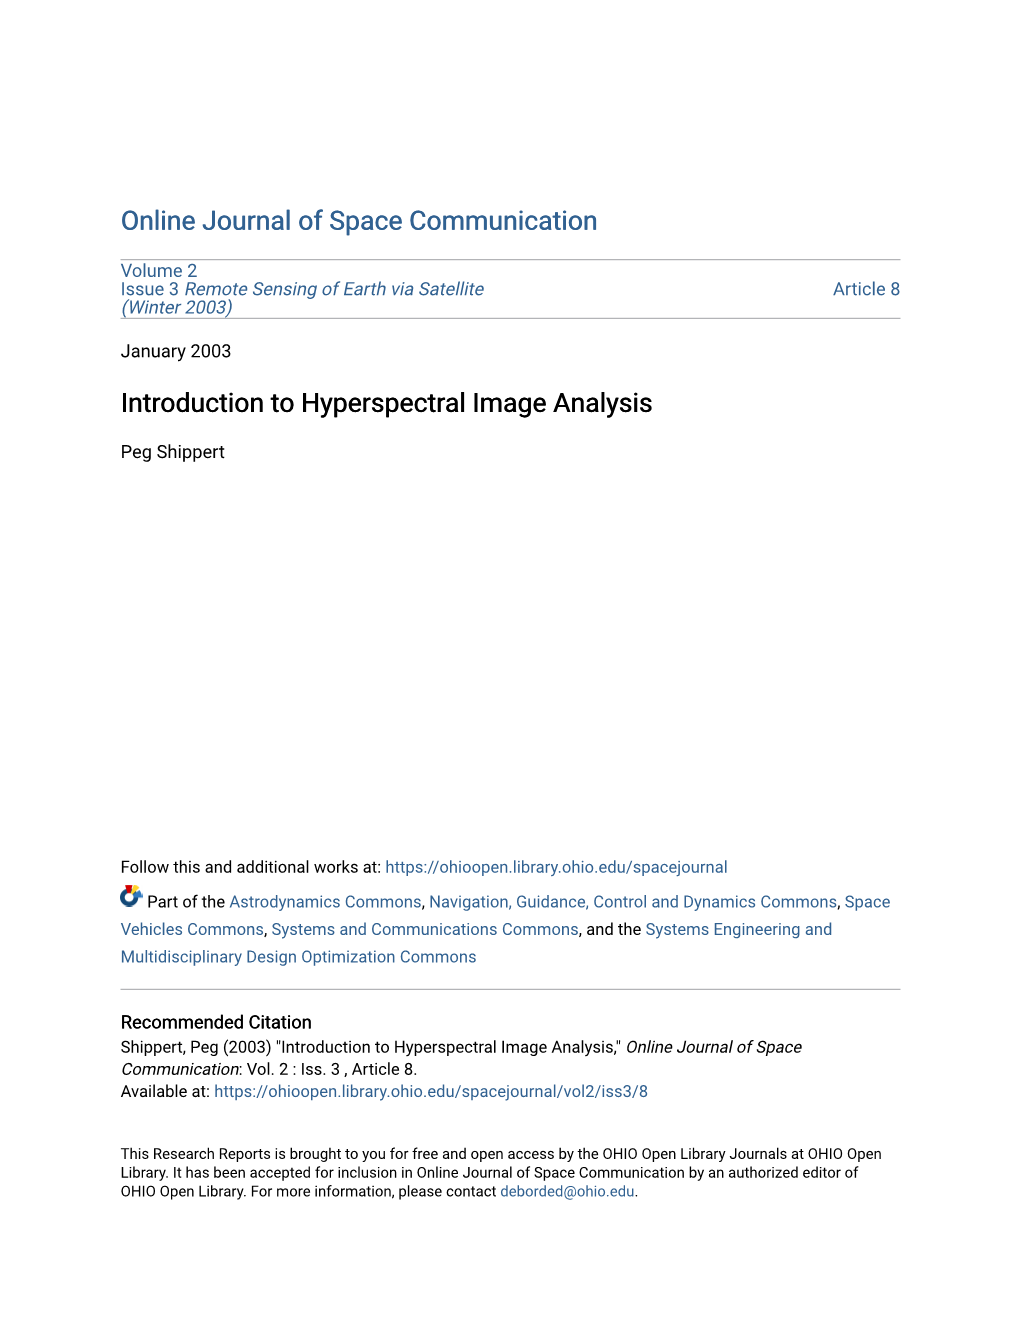 Introduction to Hyperspectral Image Analysis